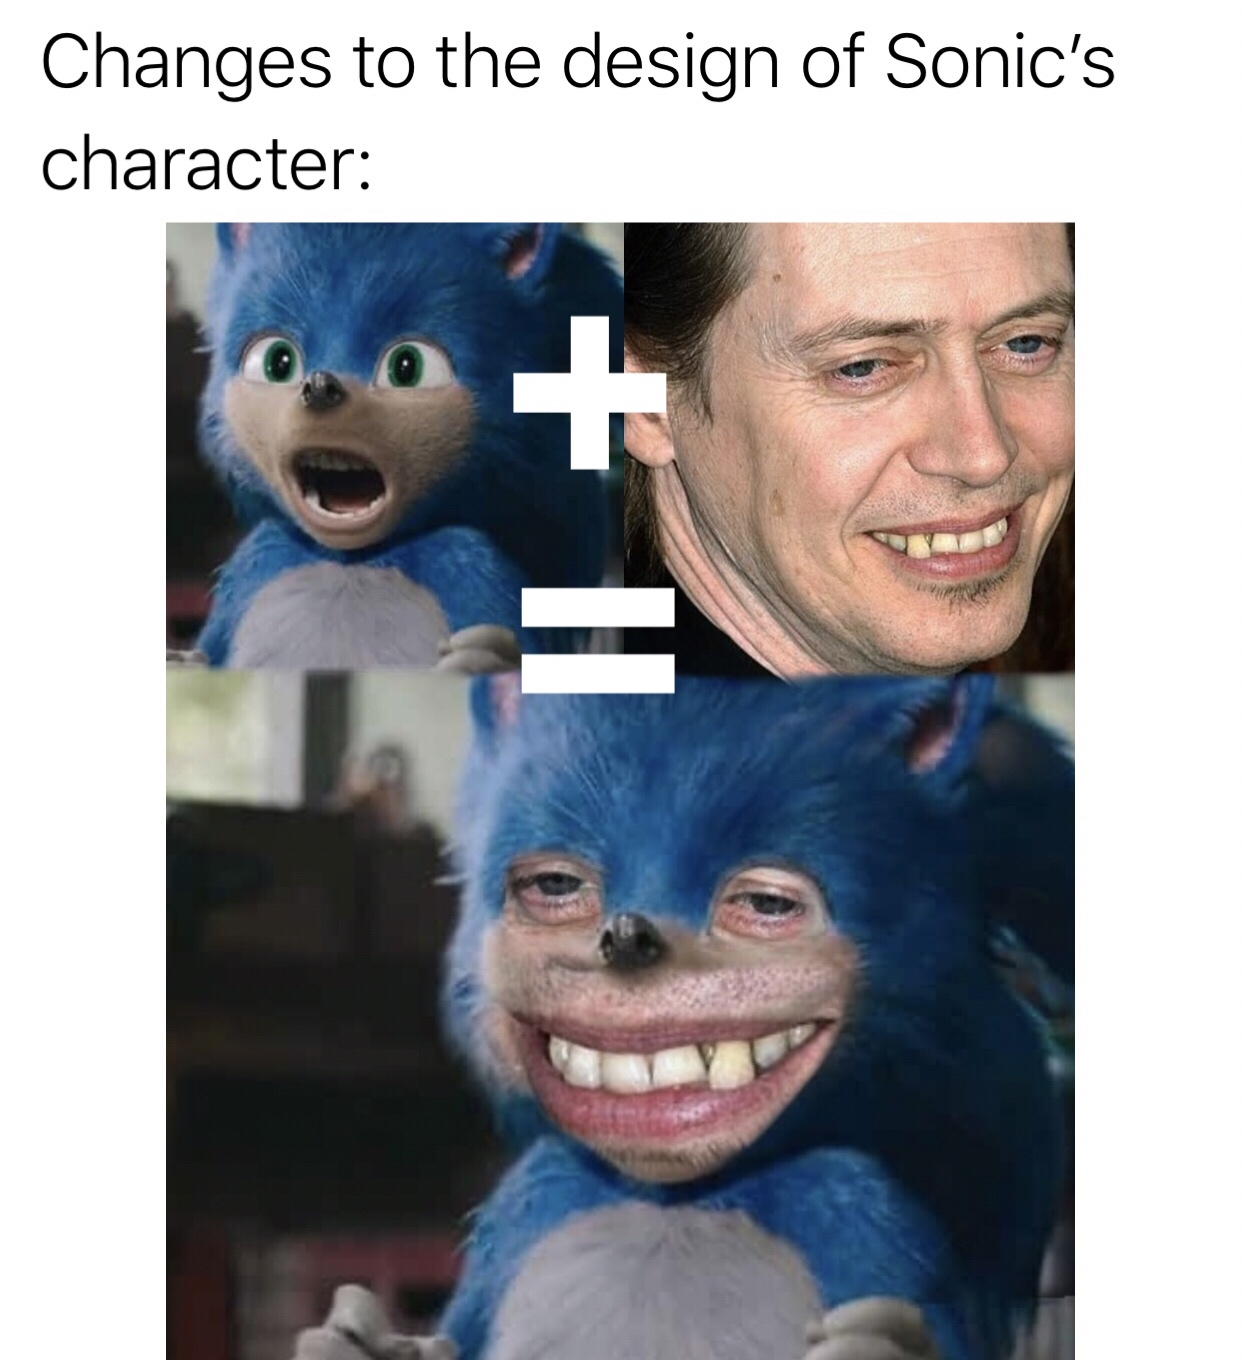 steve buscemi - Changes to the design of Sonic's character